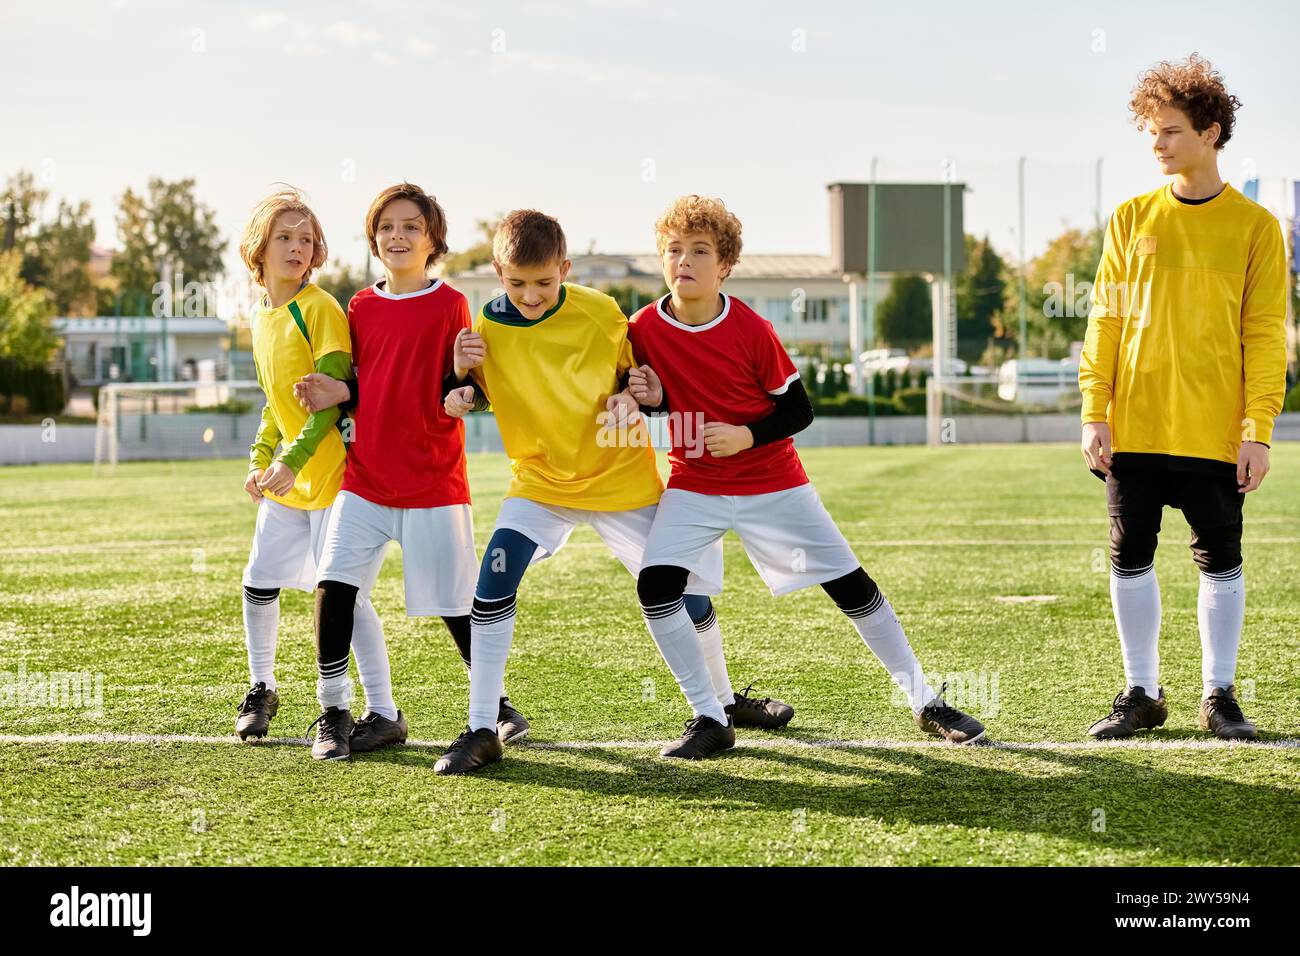 A vibrant group of youthful individuals stands proudly on the top of a soccer field, exuding energy and enthusiasm. They are united in their love for Stock Photo